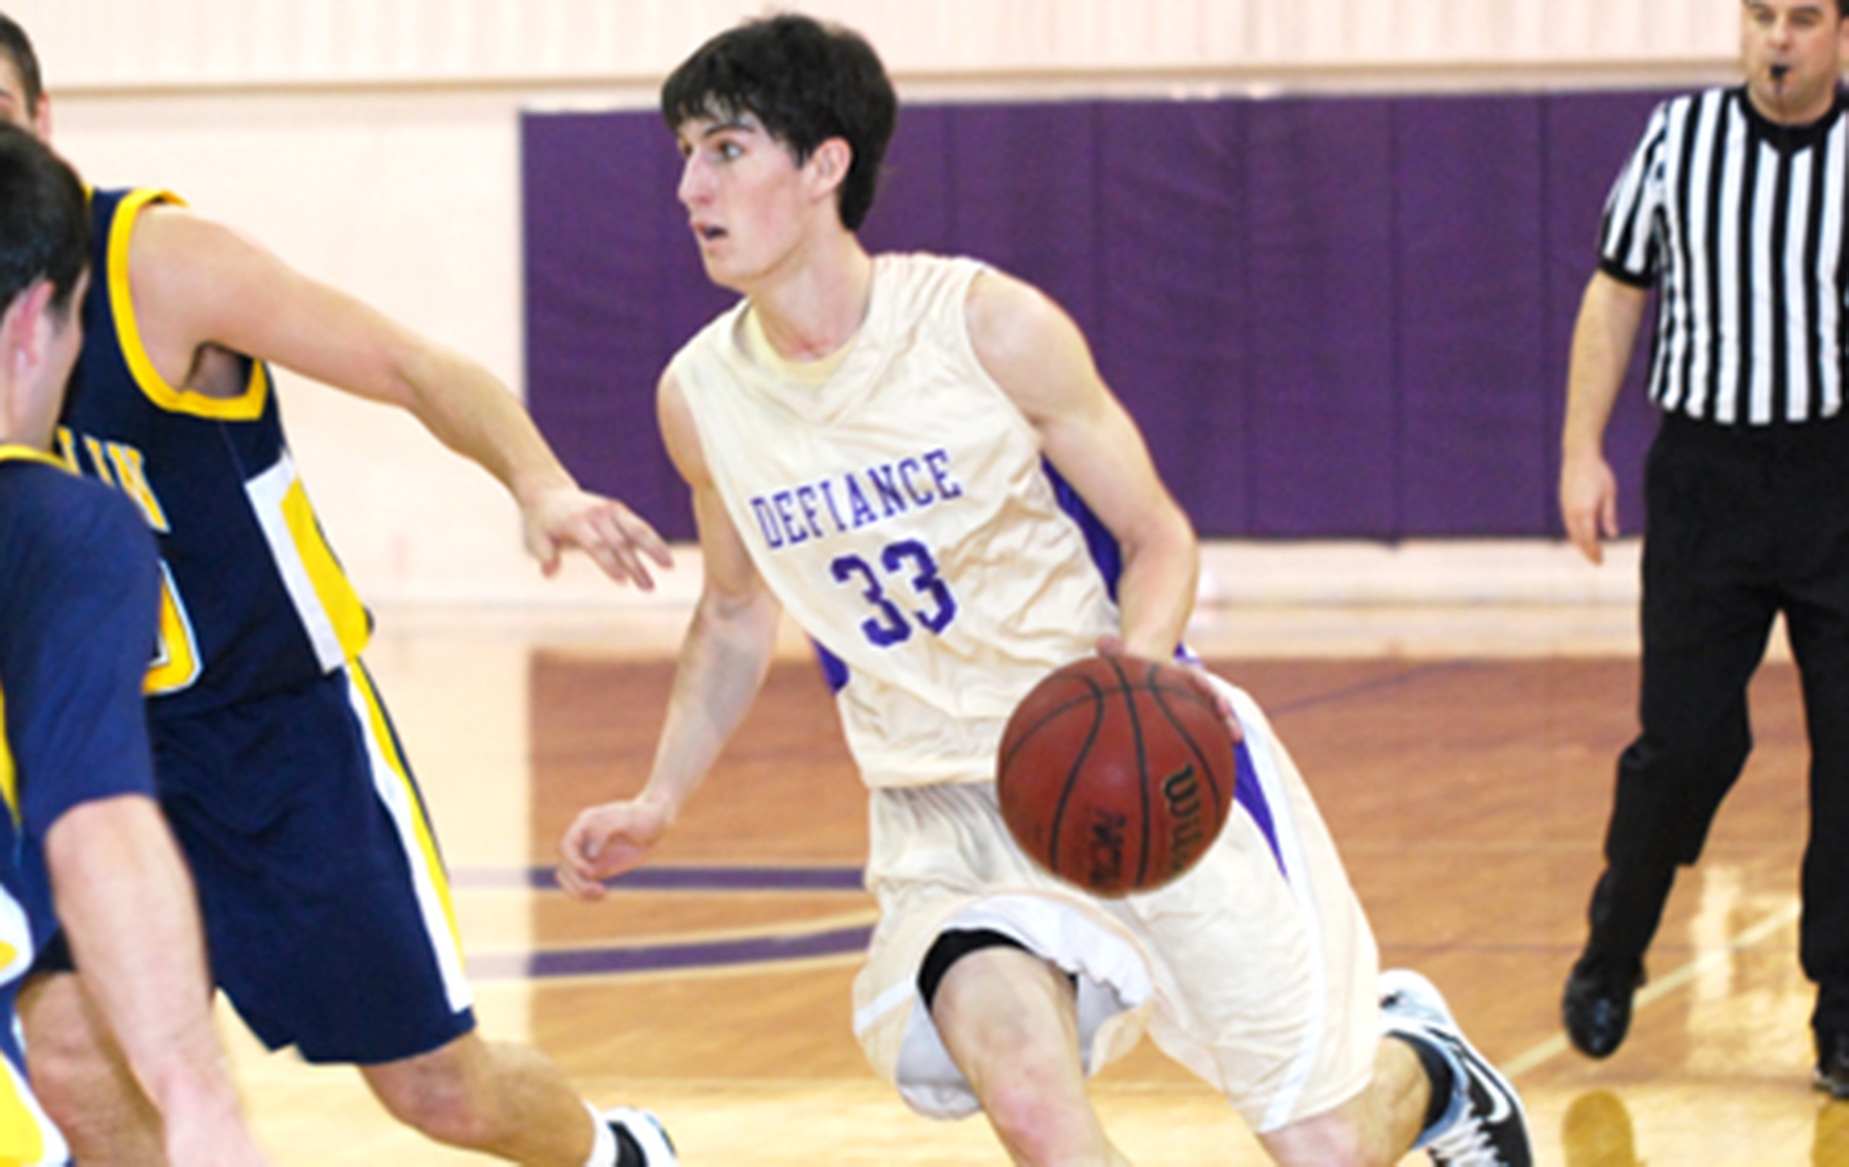 Wolfrum Eclipses 1,000-Point Barrier in Defiance Loss